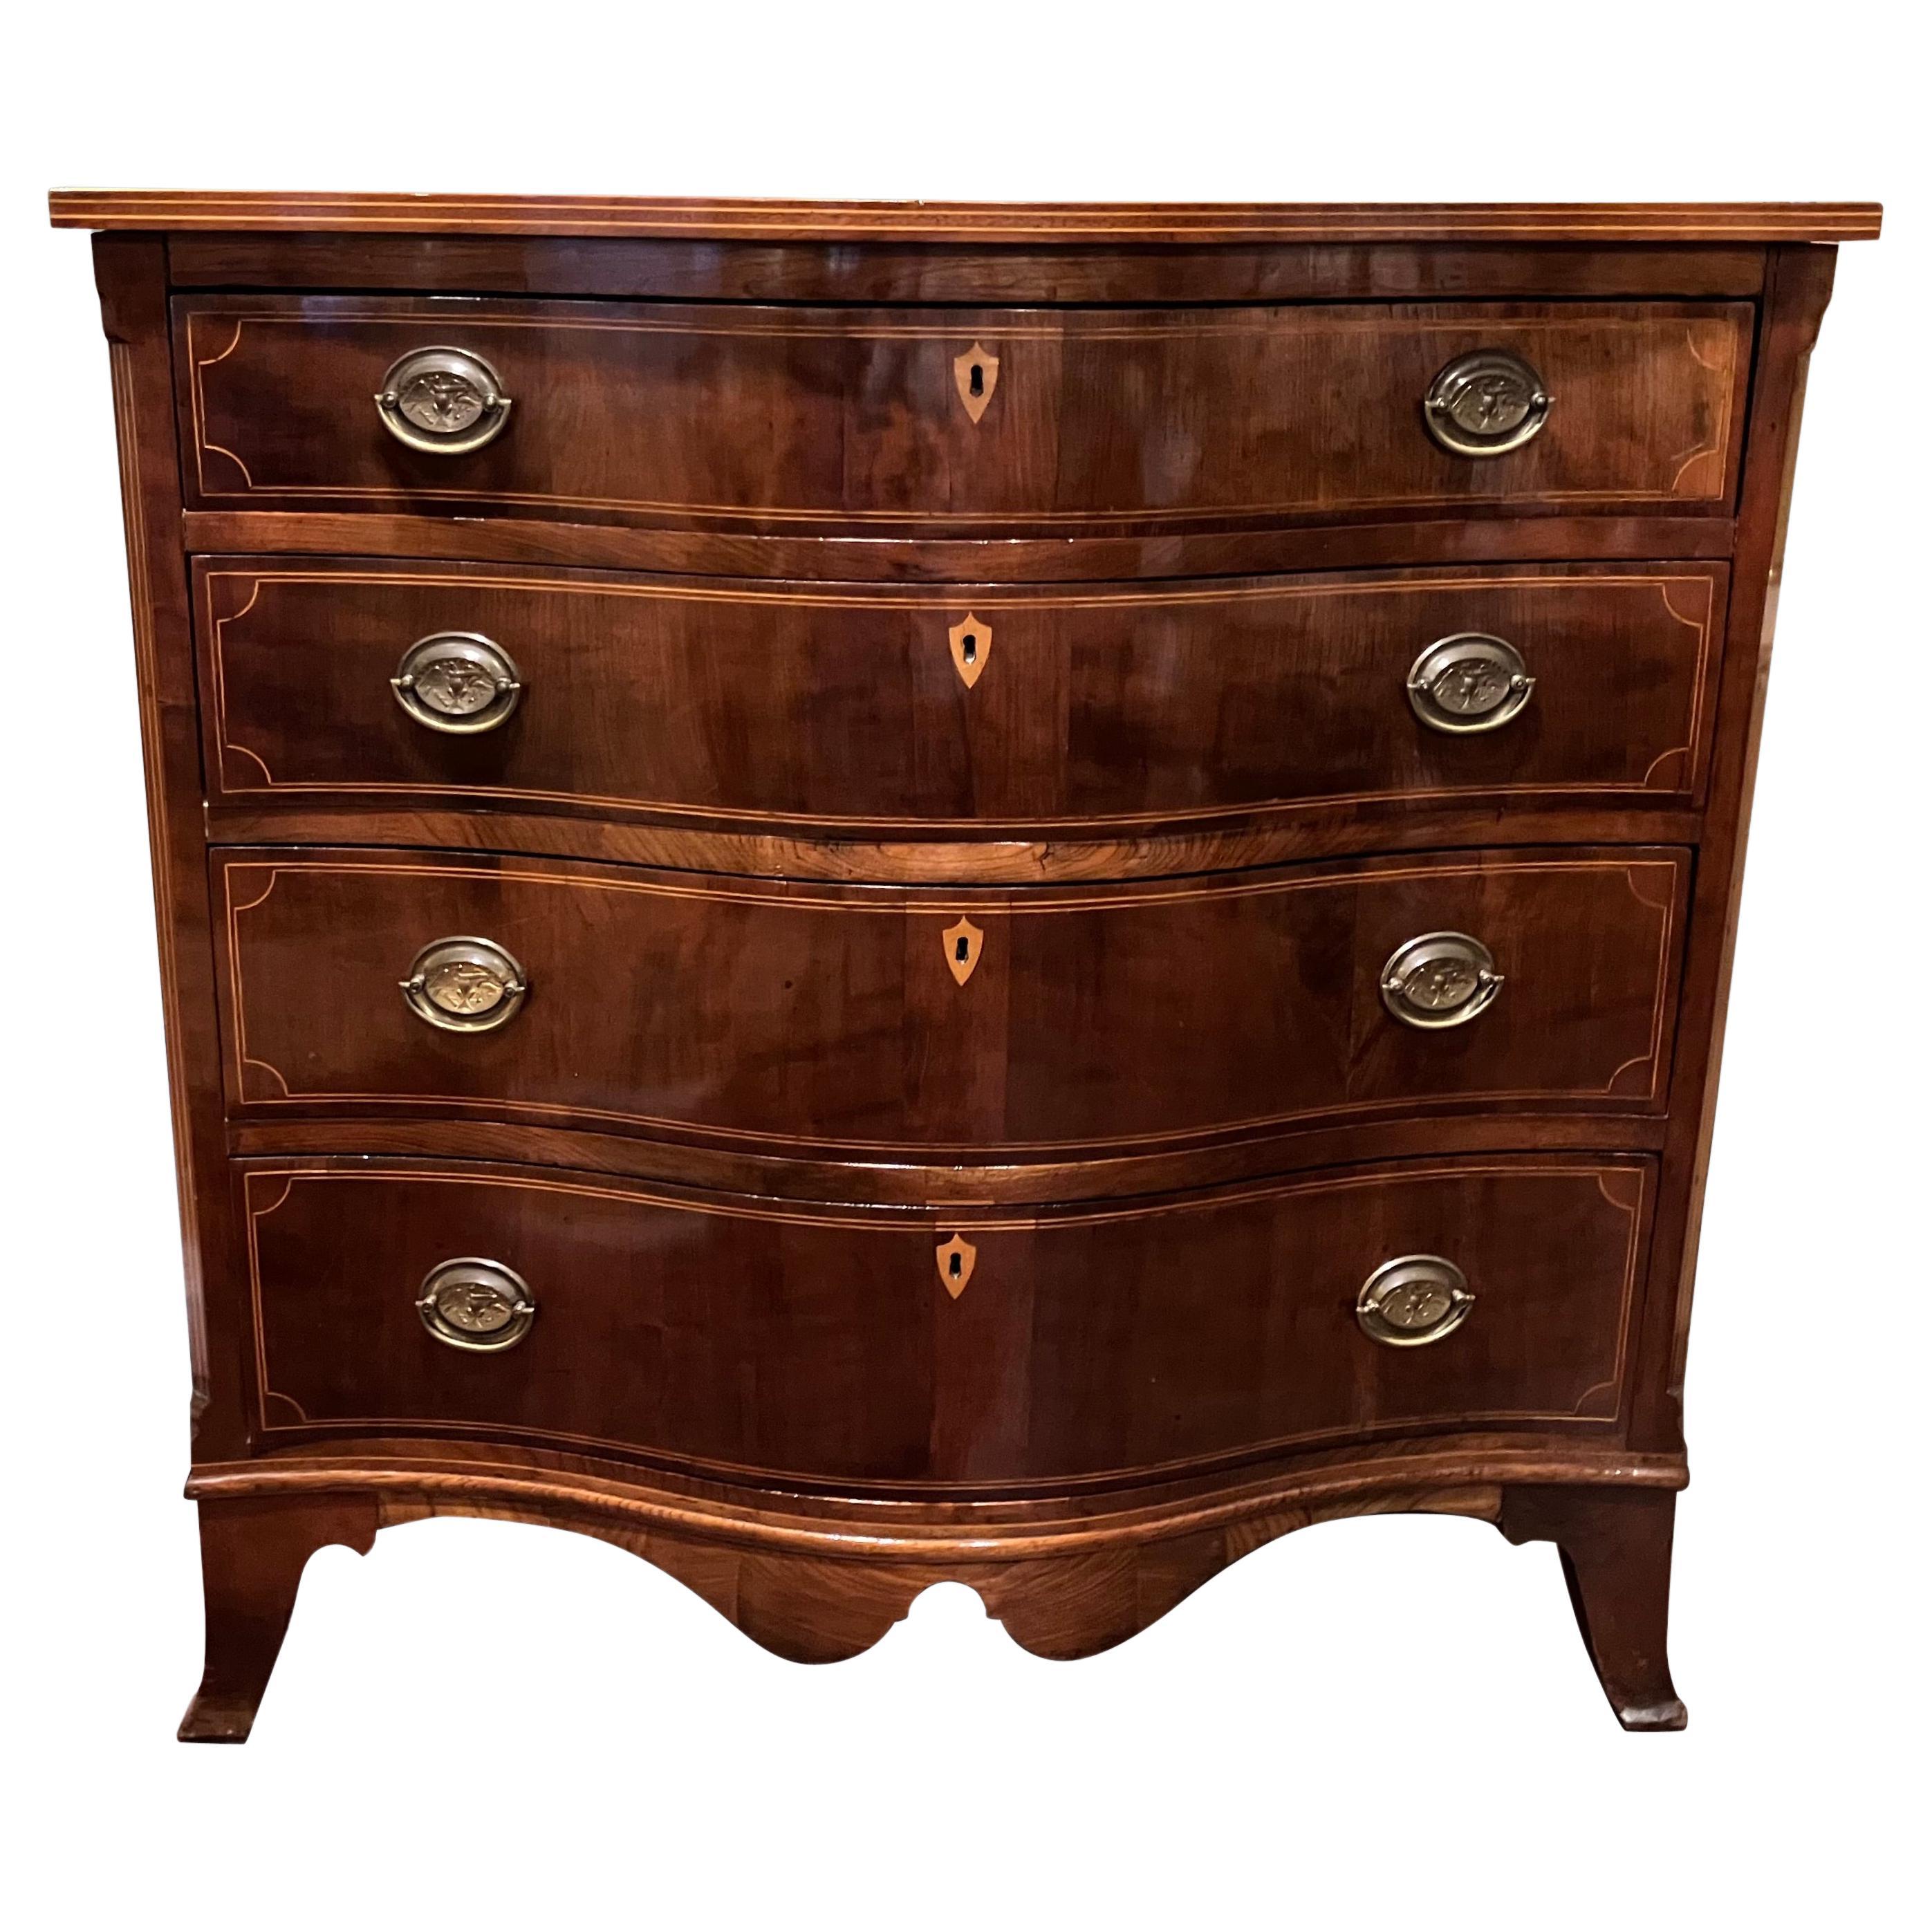 Hepplewhite Style Inlaid Mahogany Serpentine Chest of Drawers For Sale